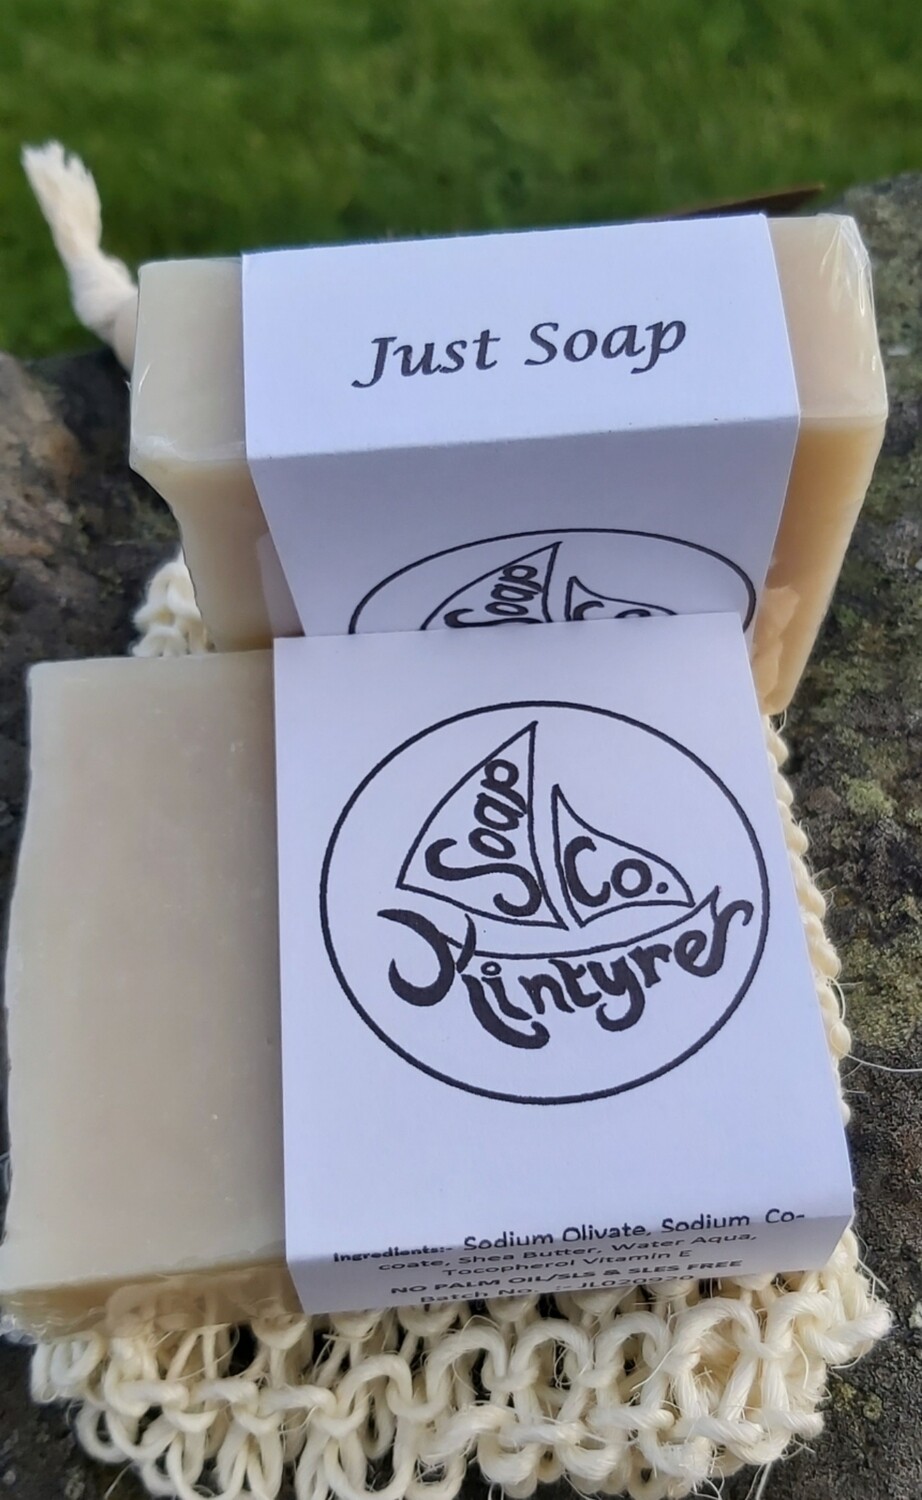 Just soap